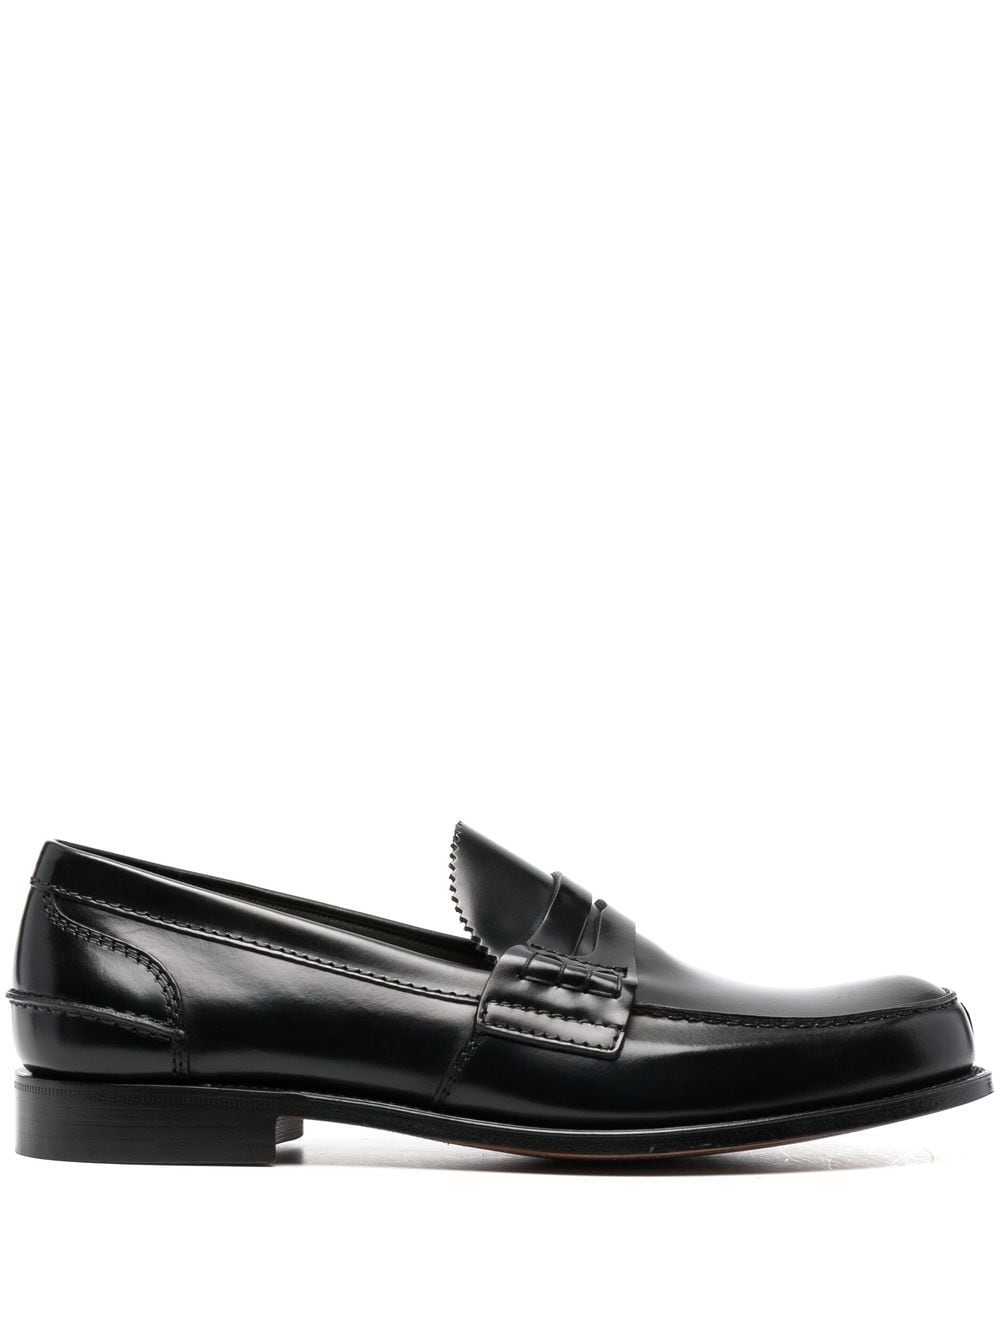 Church's polished-finish round-toe loafers - Black von Church's